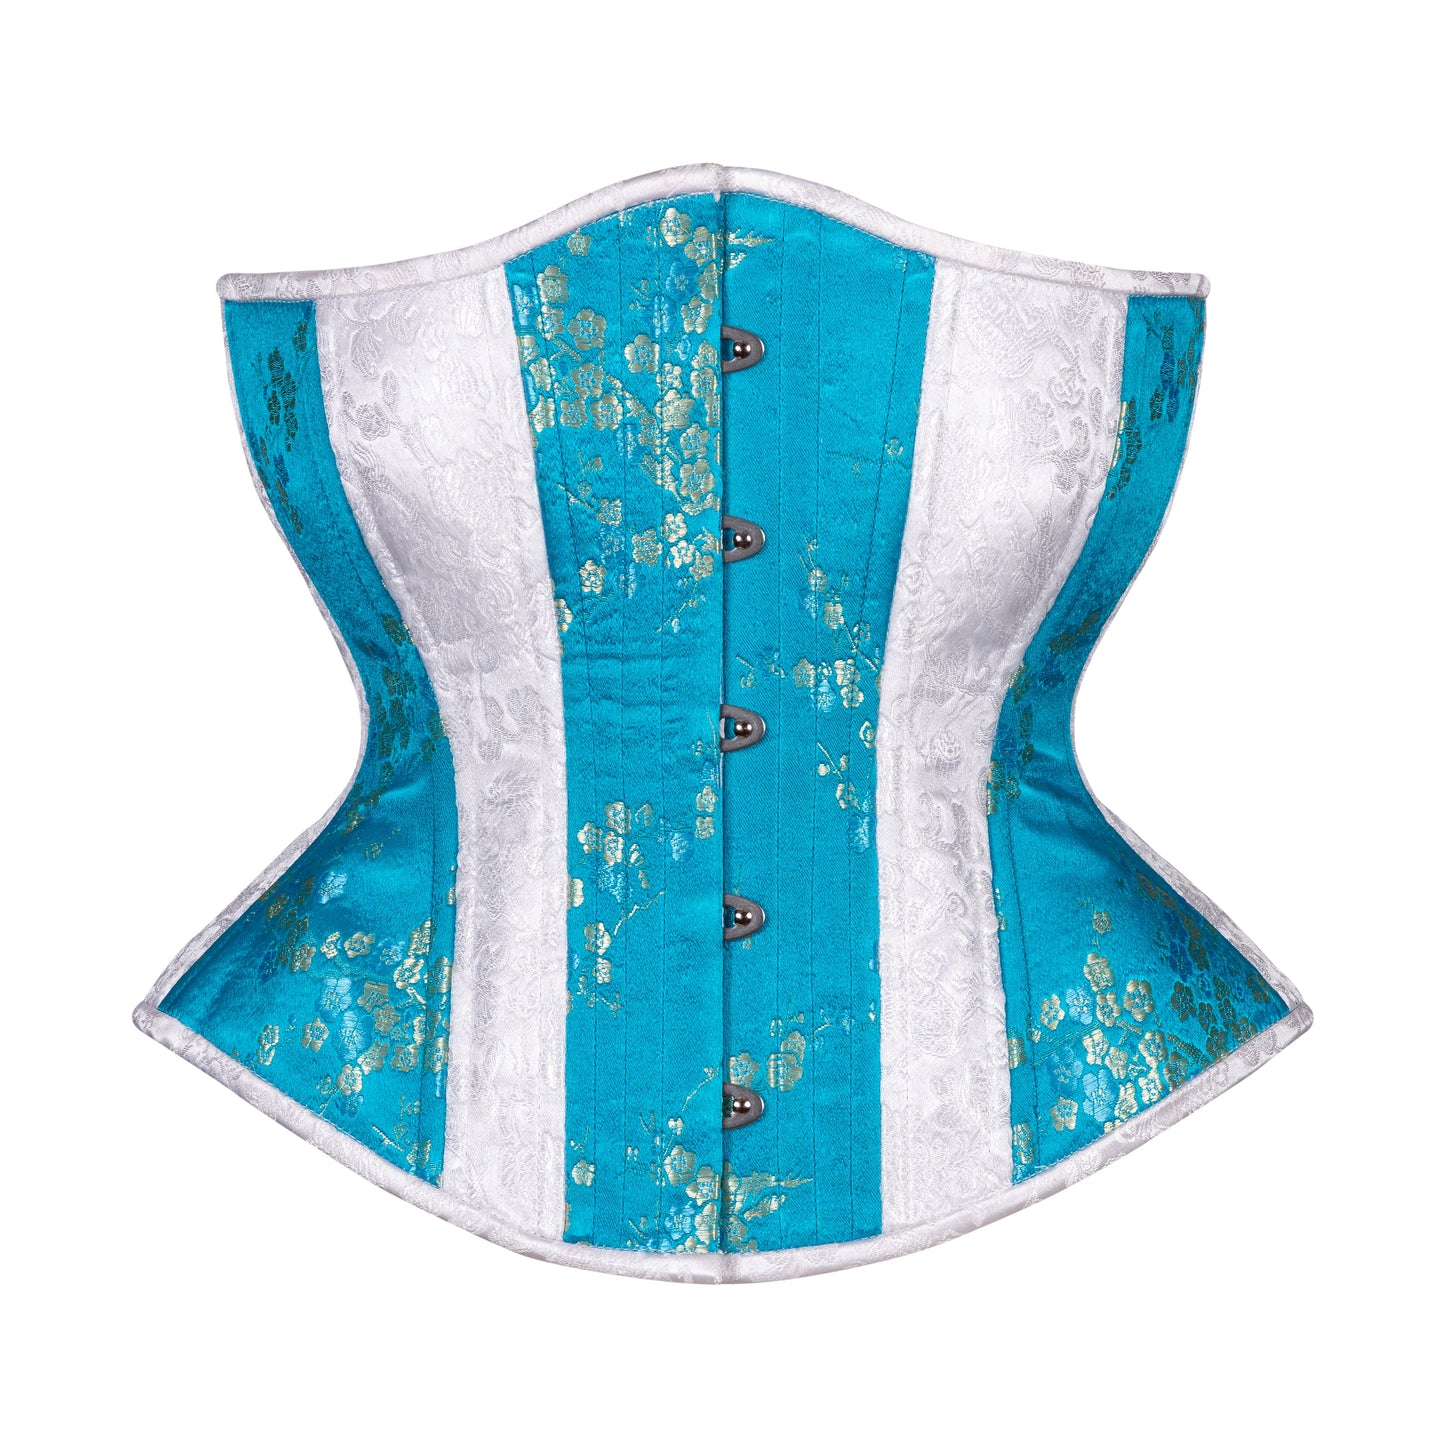 Floral in White and Blue Novice Corset, Hourglass Silhouette, Regular ** PHOTO SAMPLE, ONLY SIZE 22 IS AVAILABLE